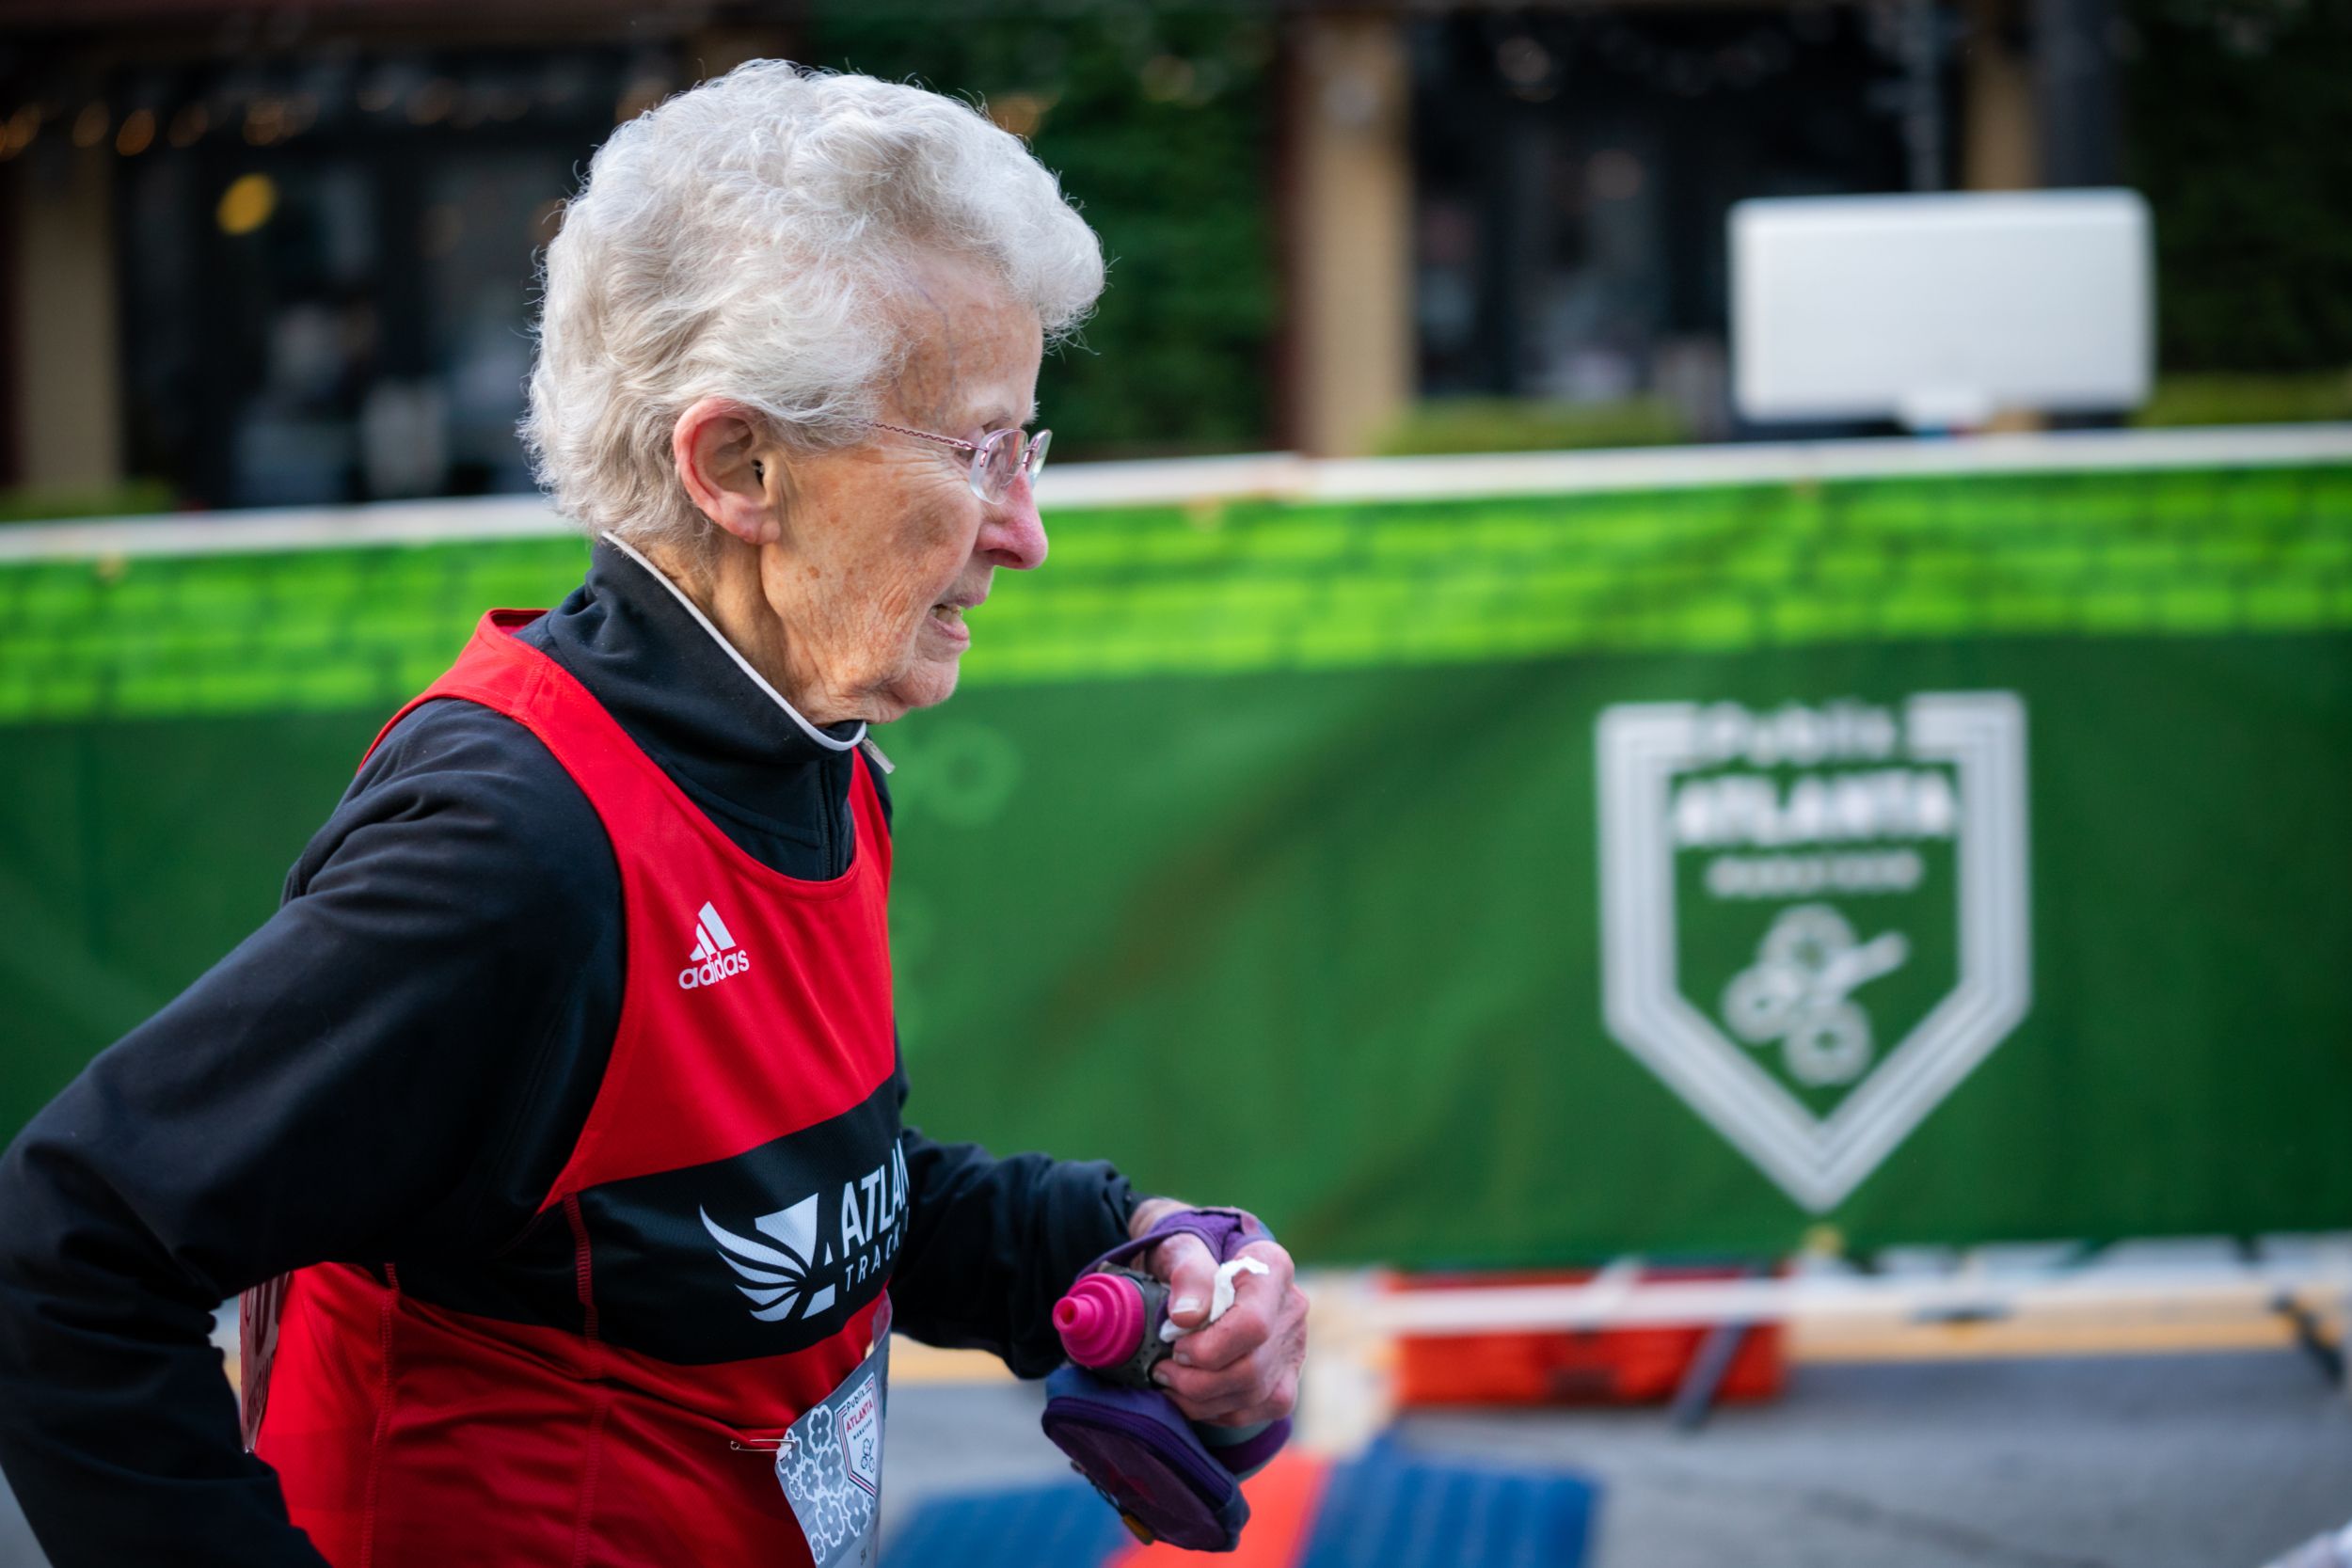 5 Things Aging Runners Need To Do In Your 50s, 60s, and Beyond - CTS